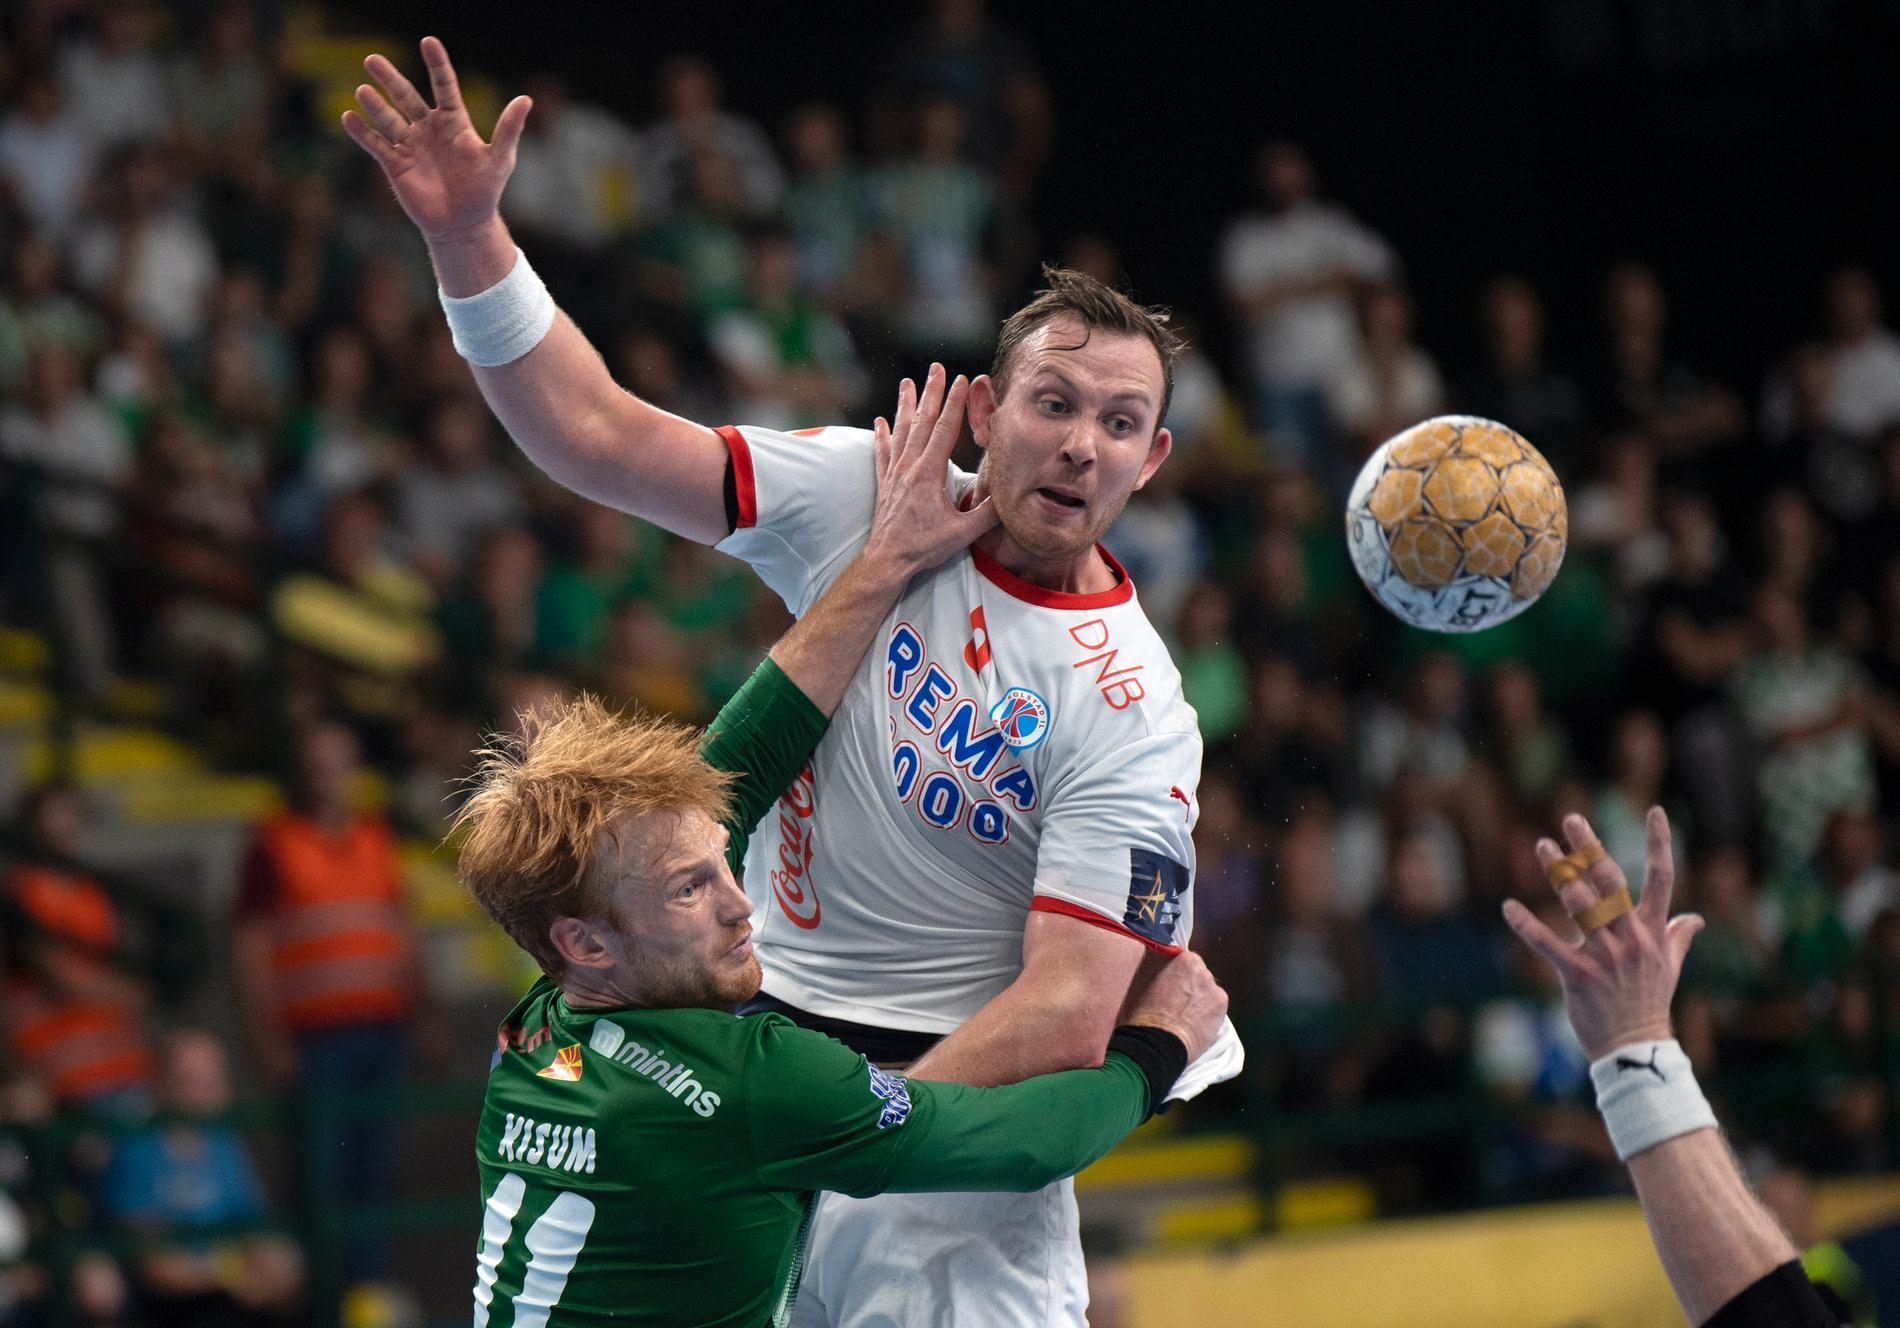 Glicent: Last year, handball fans were able to watch the Champions League on Viaplay.  This year, there are no Norwegian TV channels running this right.  Sander Sagosen and Kolstad played their first Champions League matches on Wednesday.